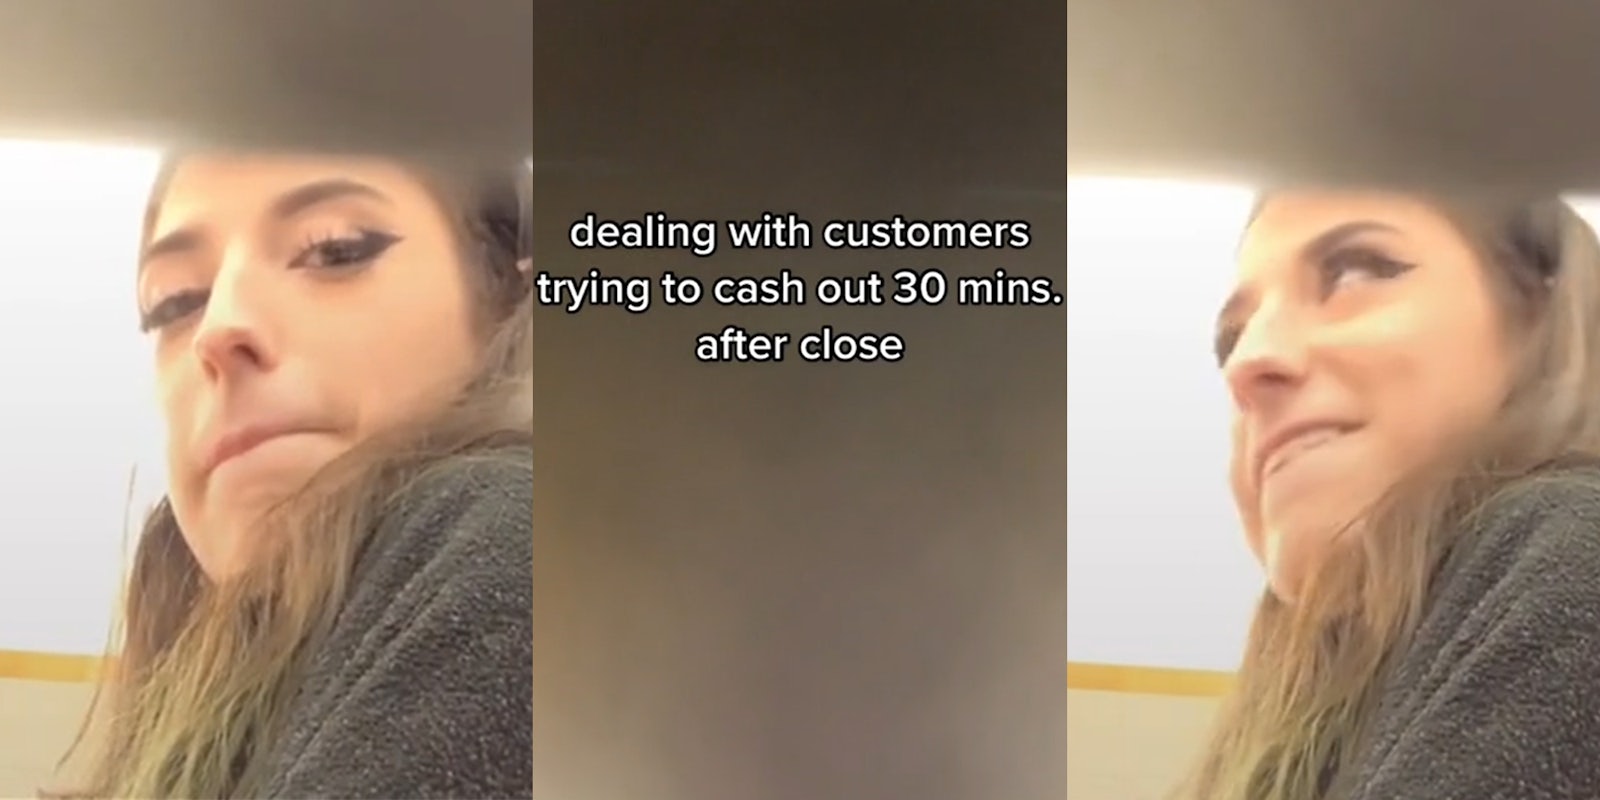 Female worker sour expression (l) caption 'dealing with customers trying to cash out 30 mins. after close' (c) Female worker annoyed expression (r)